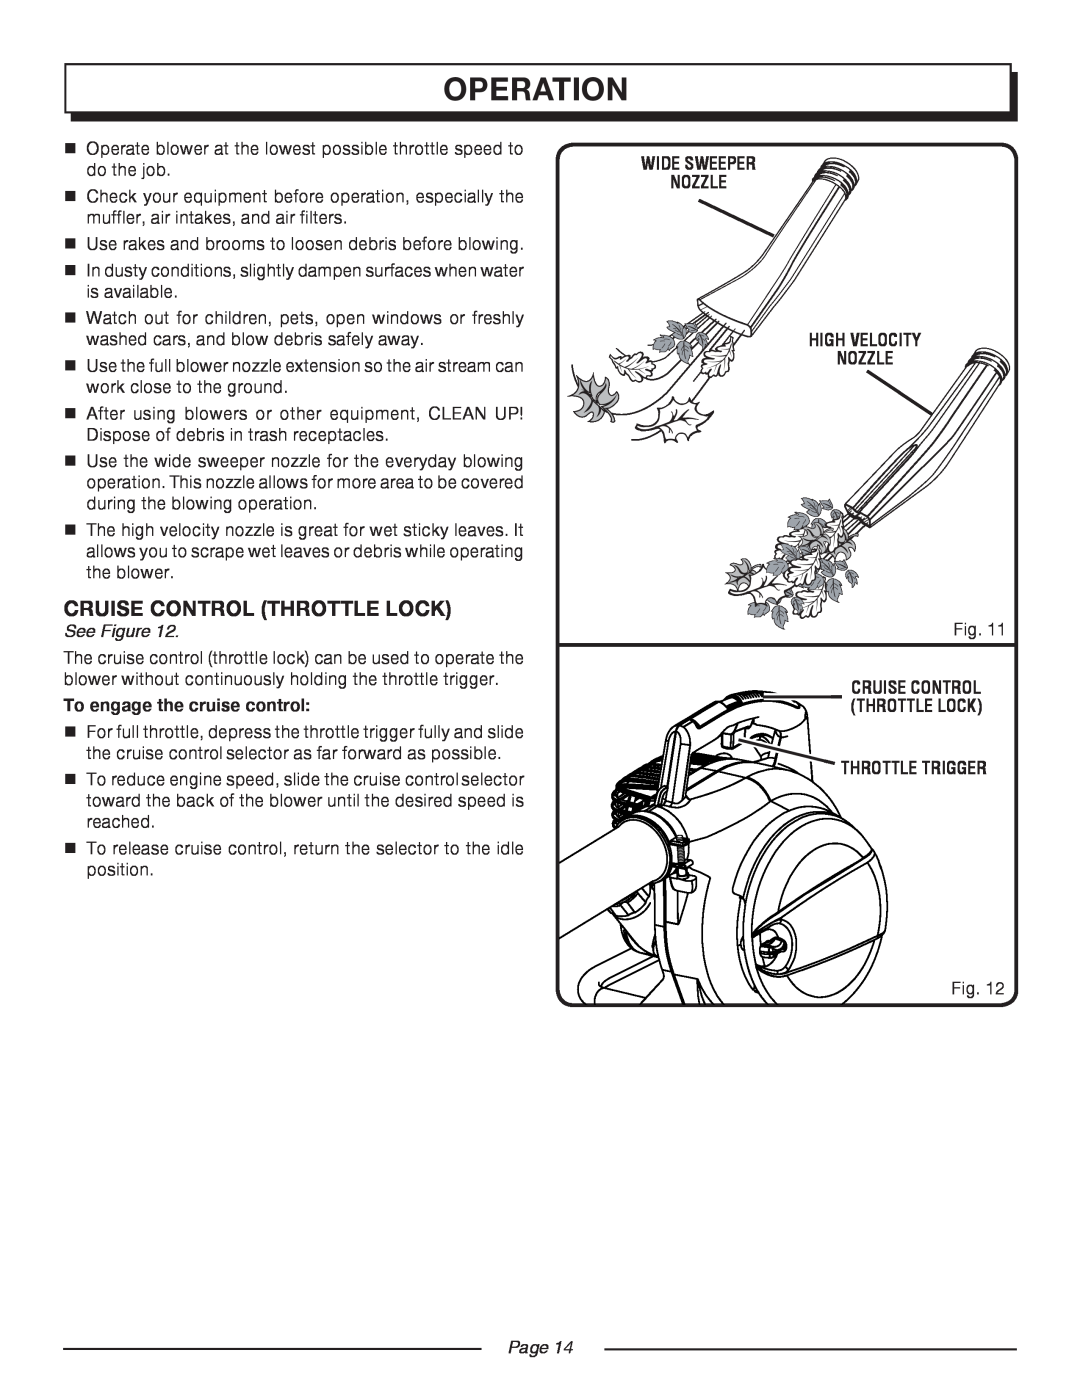 Homelite UT08947 manual Operation, See Figure, To engage the cruise control, Wide Sweeper Nozzle High Velocity Nozzle, Page 